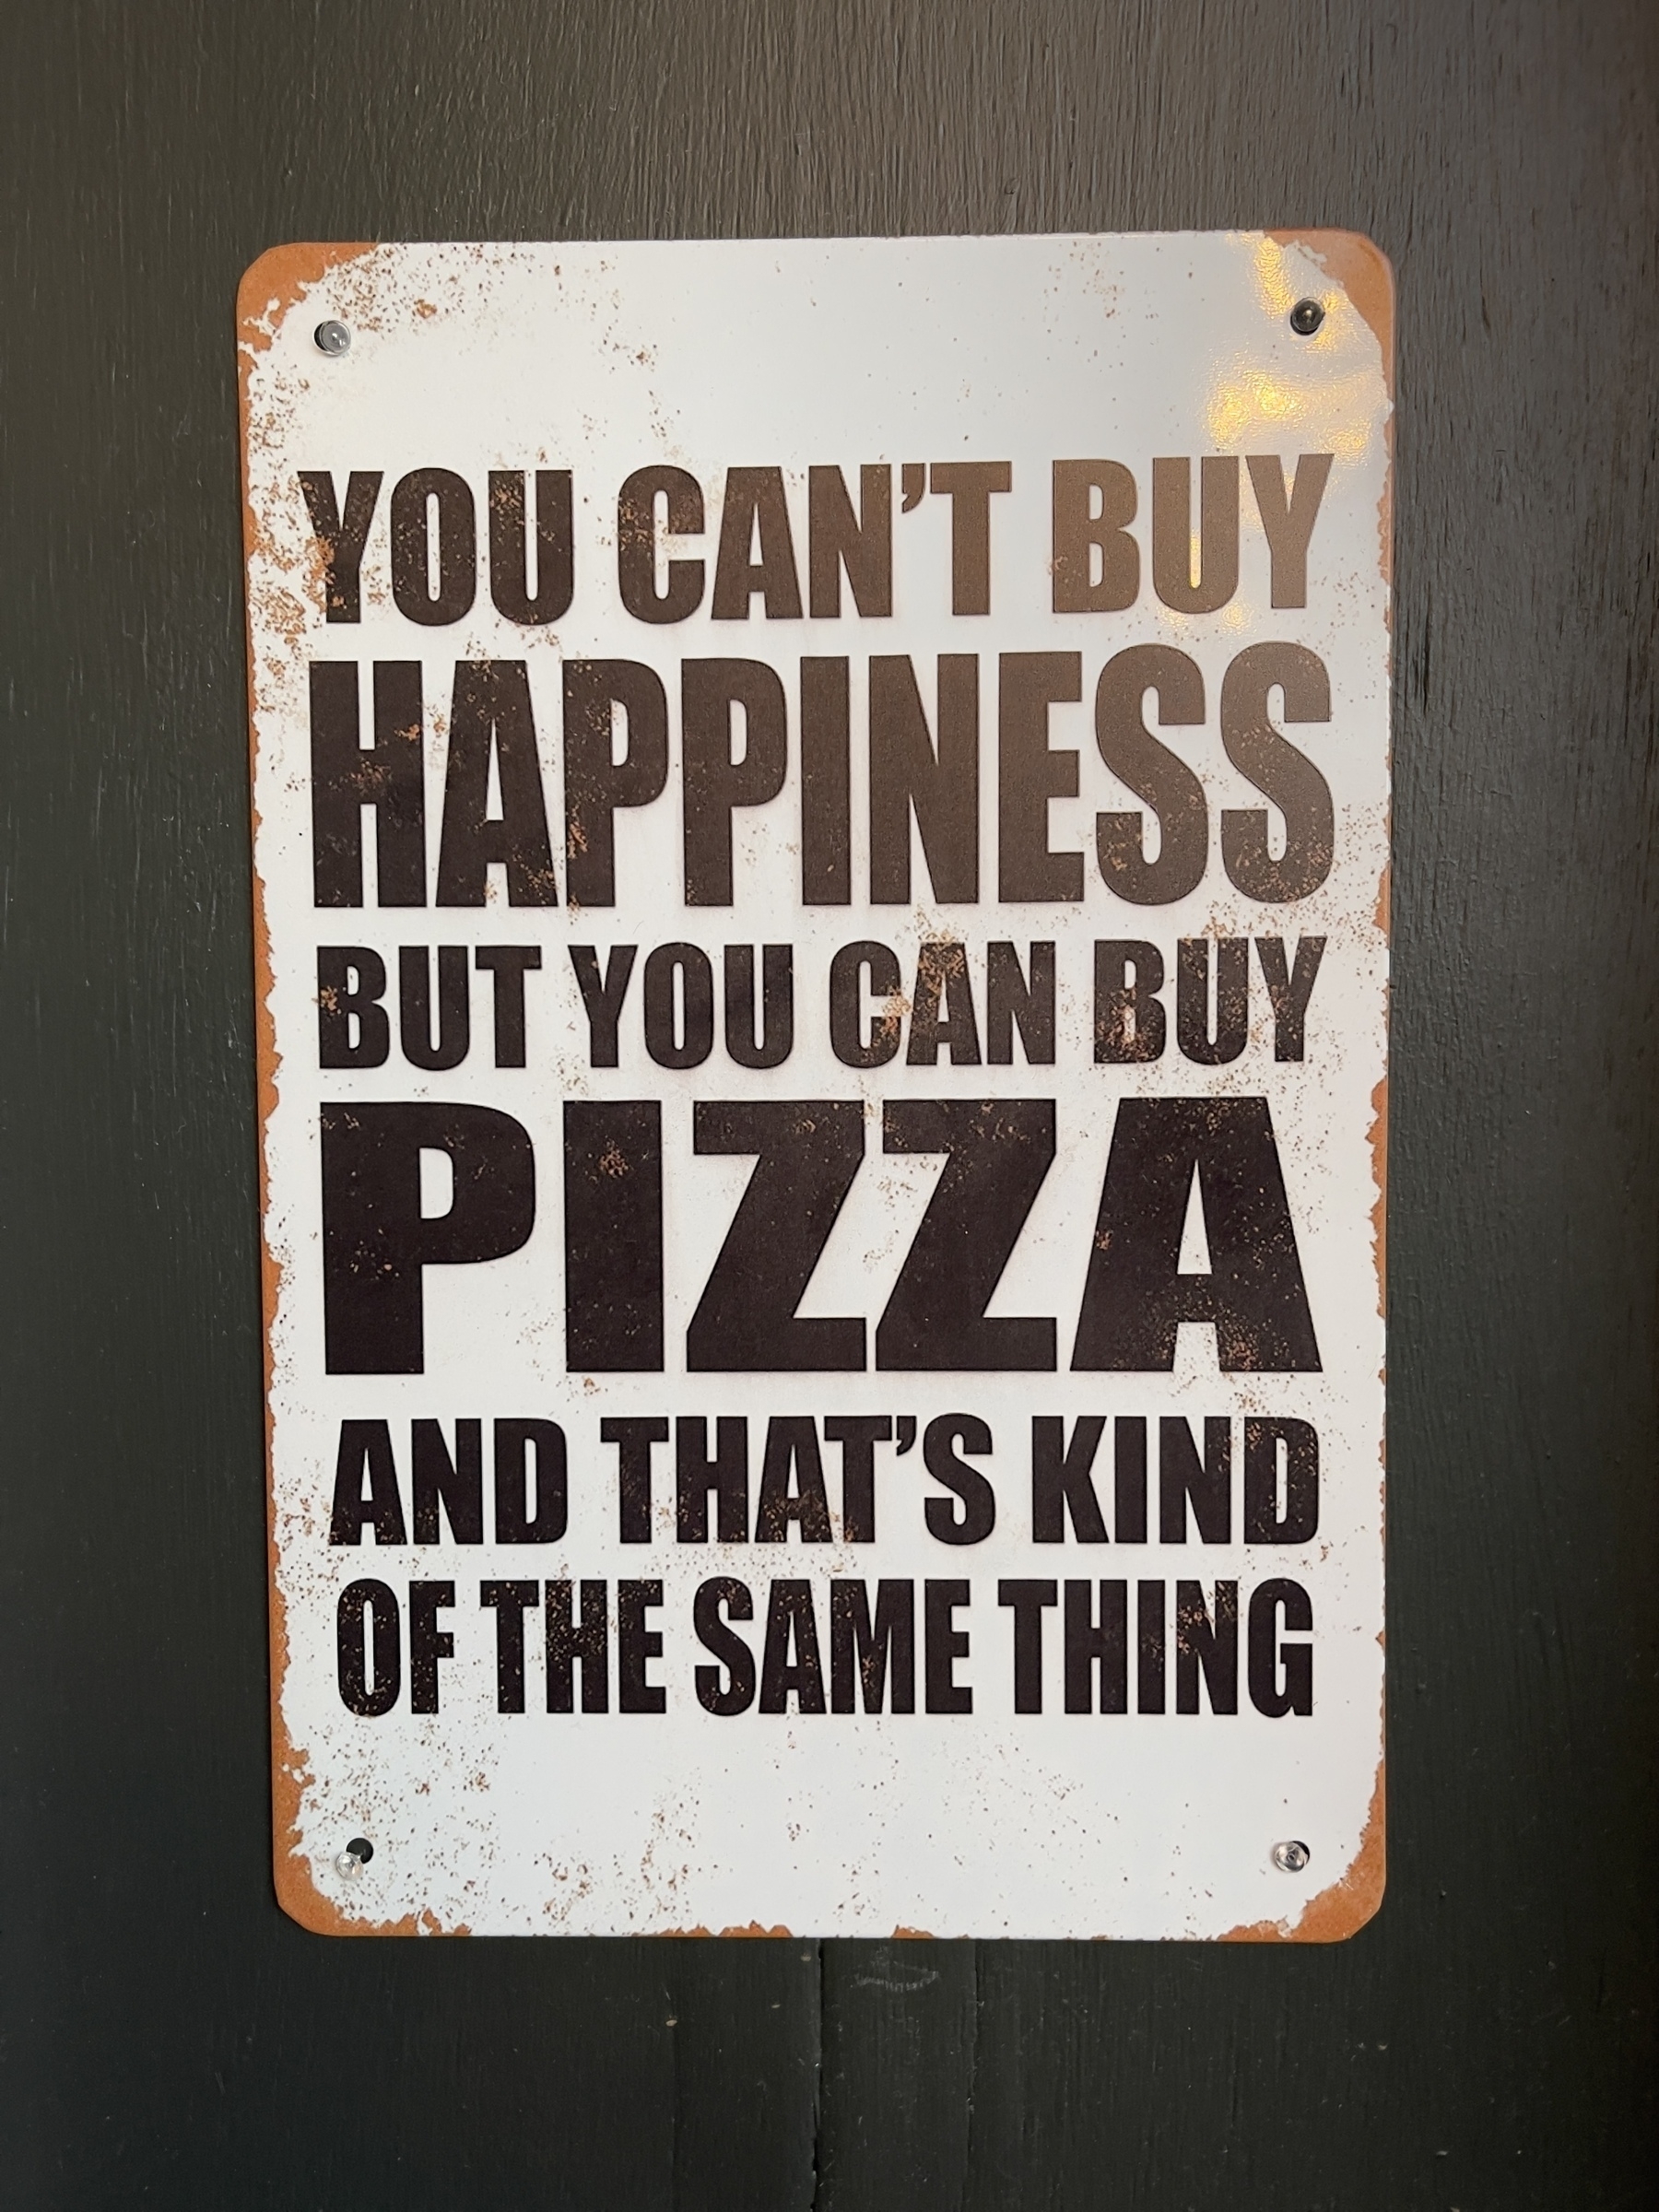 Sign saying “you can’t buy happiness but you can buy pizza and that’s kind of the same thing”